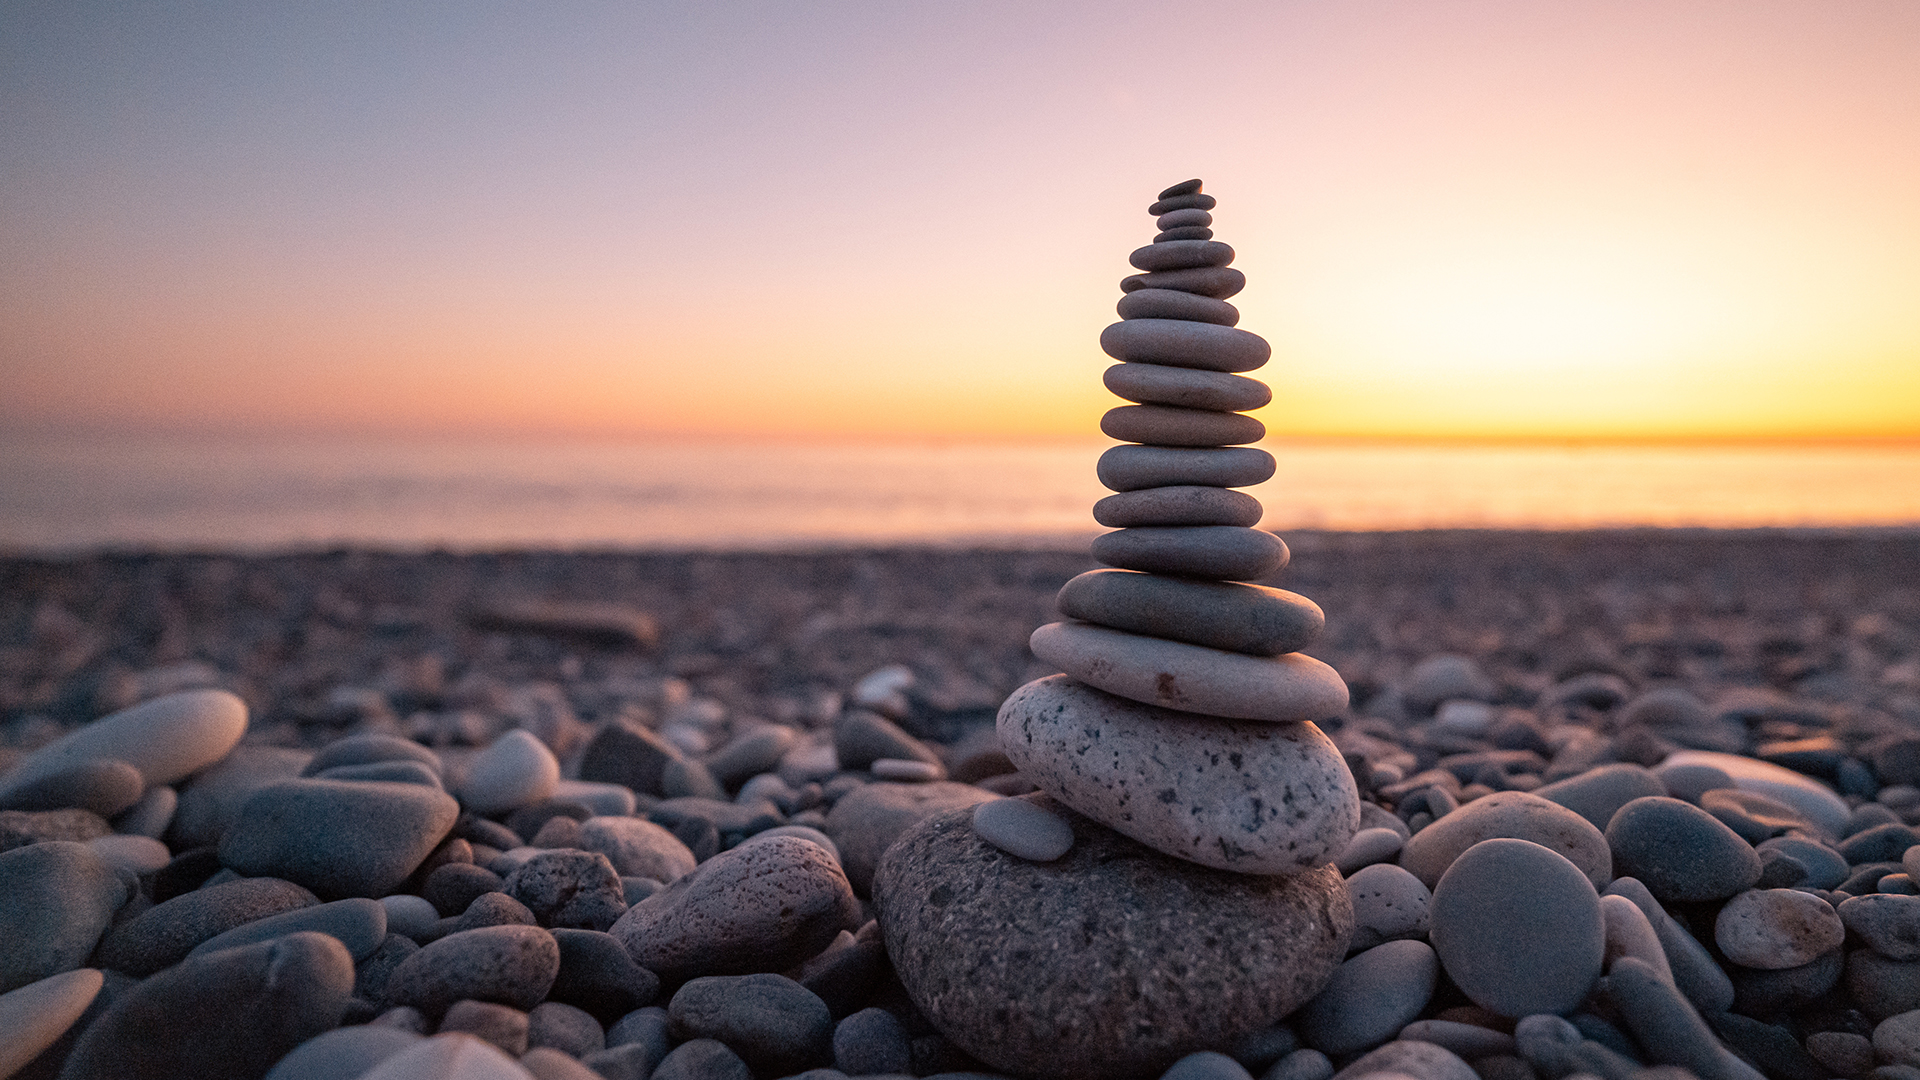 The balancing act – How important is it to take a break from work? 